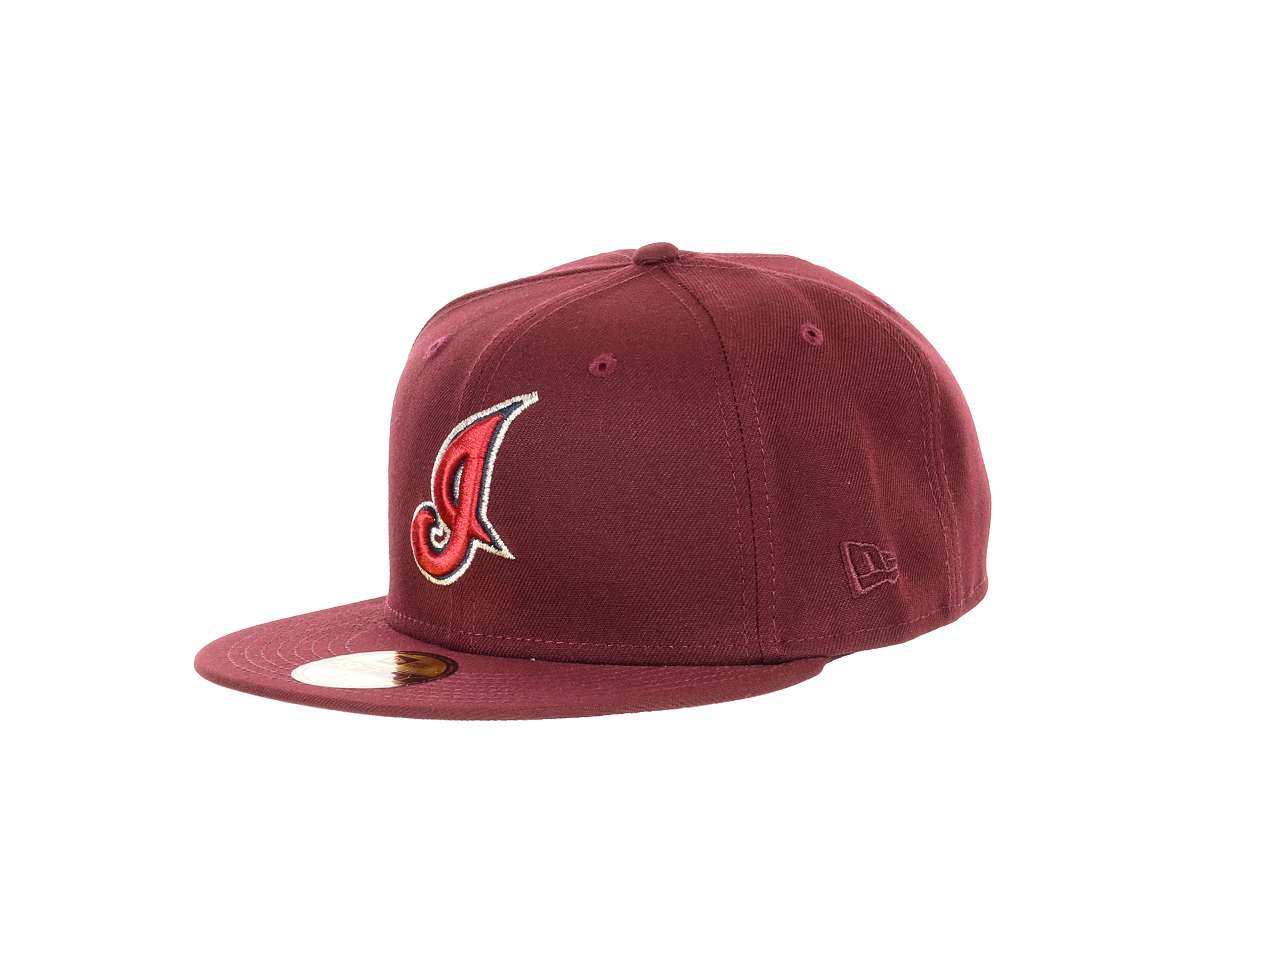 Cleveland Indians MLB Jacobs Field 10th Anniversary Sidepatch Maroon 59Fifty Basecap New Era